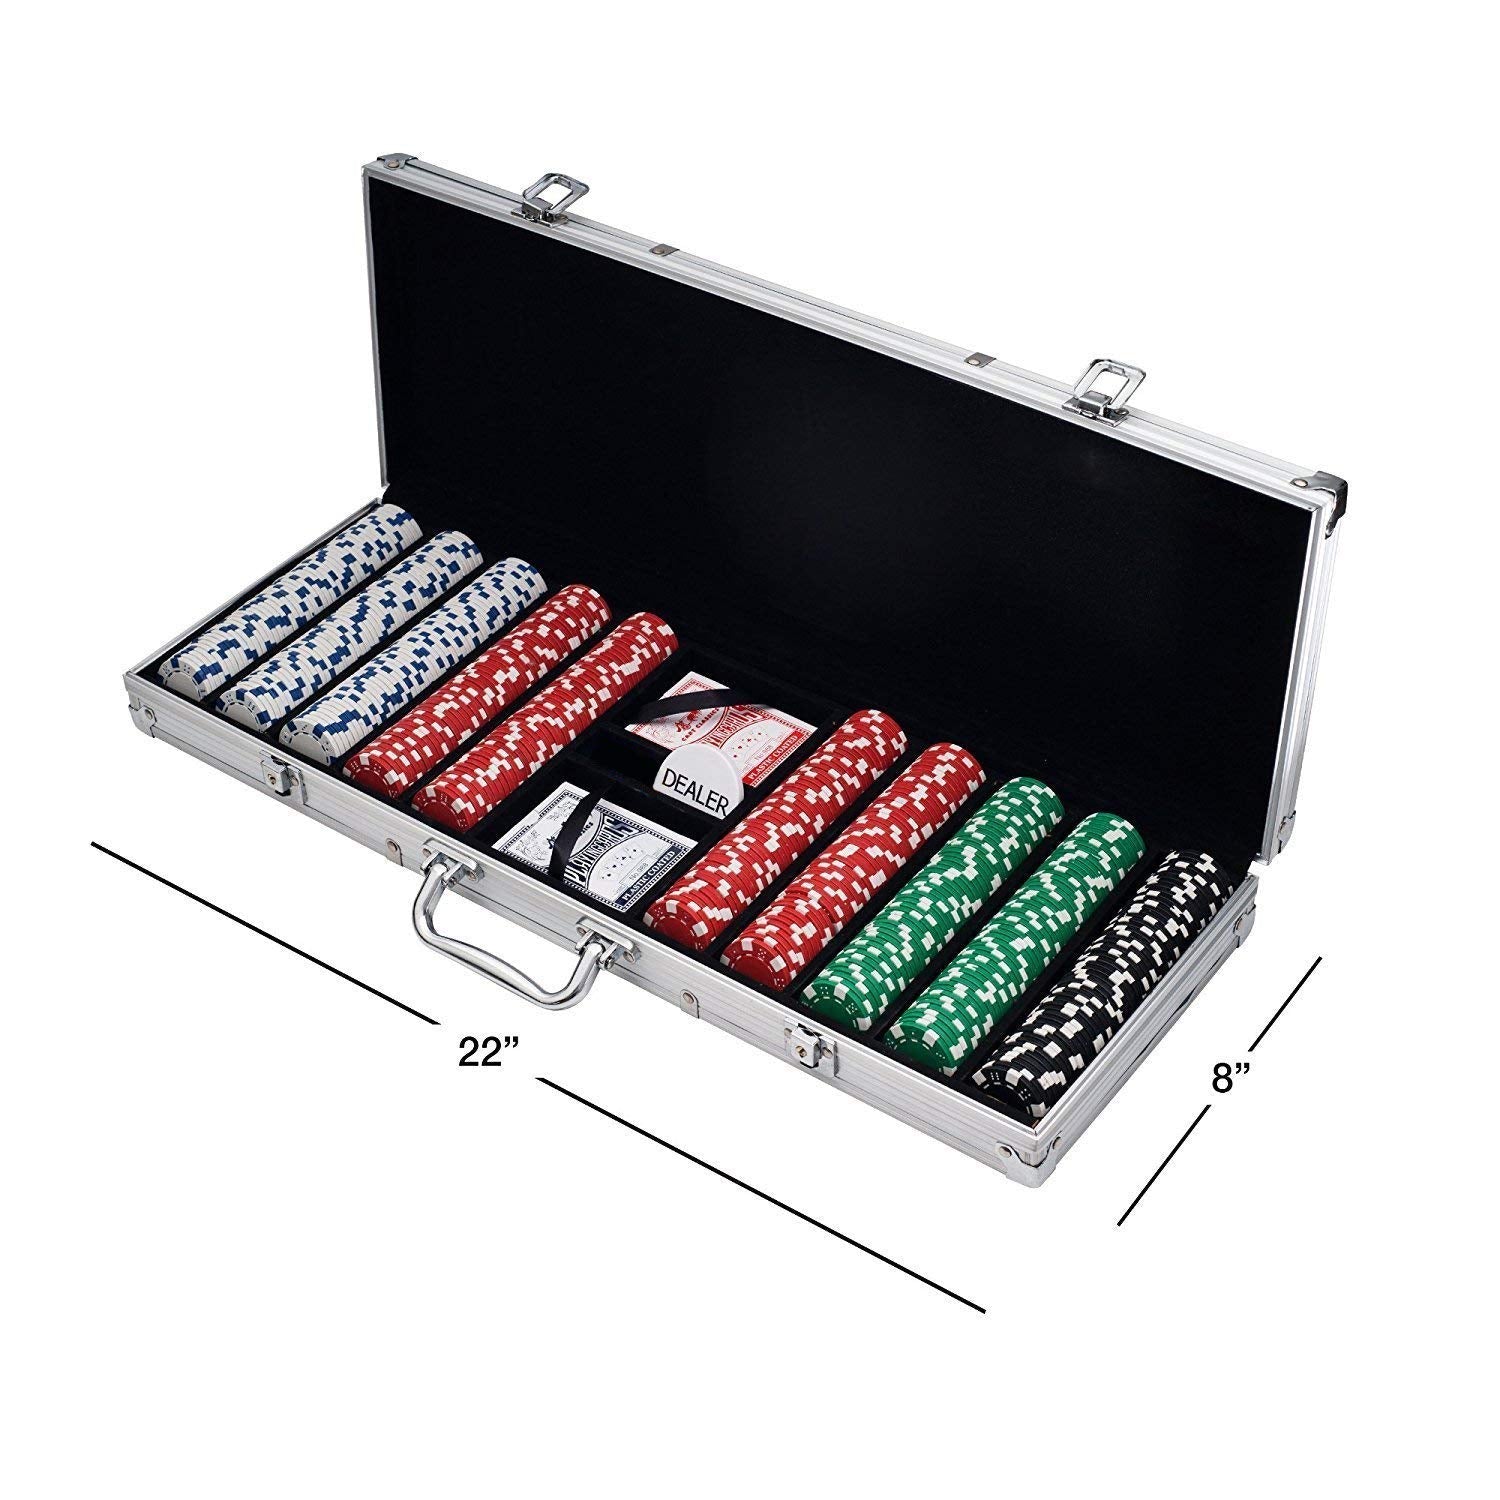 KIDS MANDI complete poker game set with chips, cards, and case